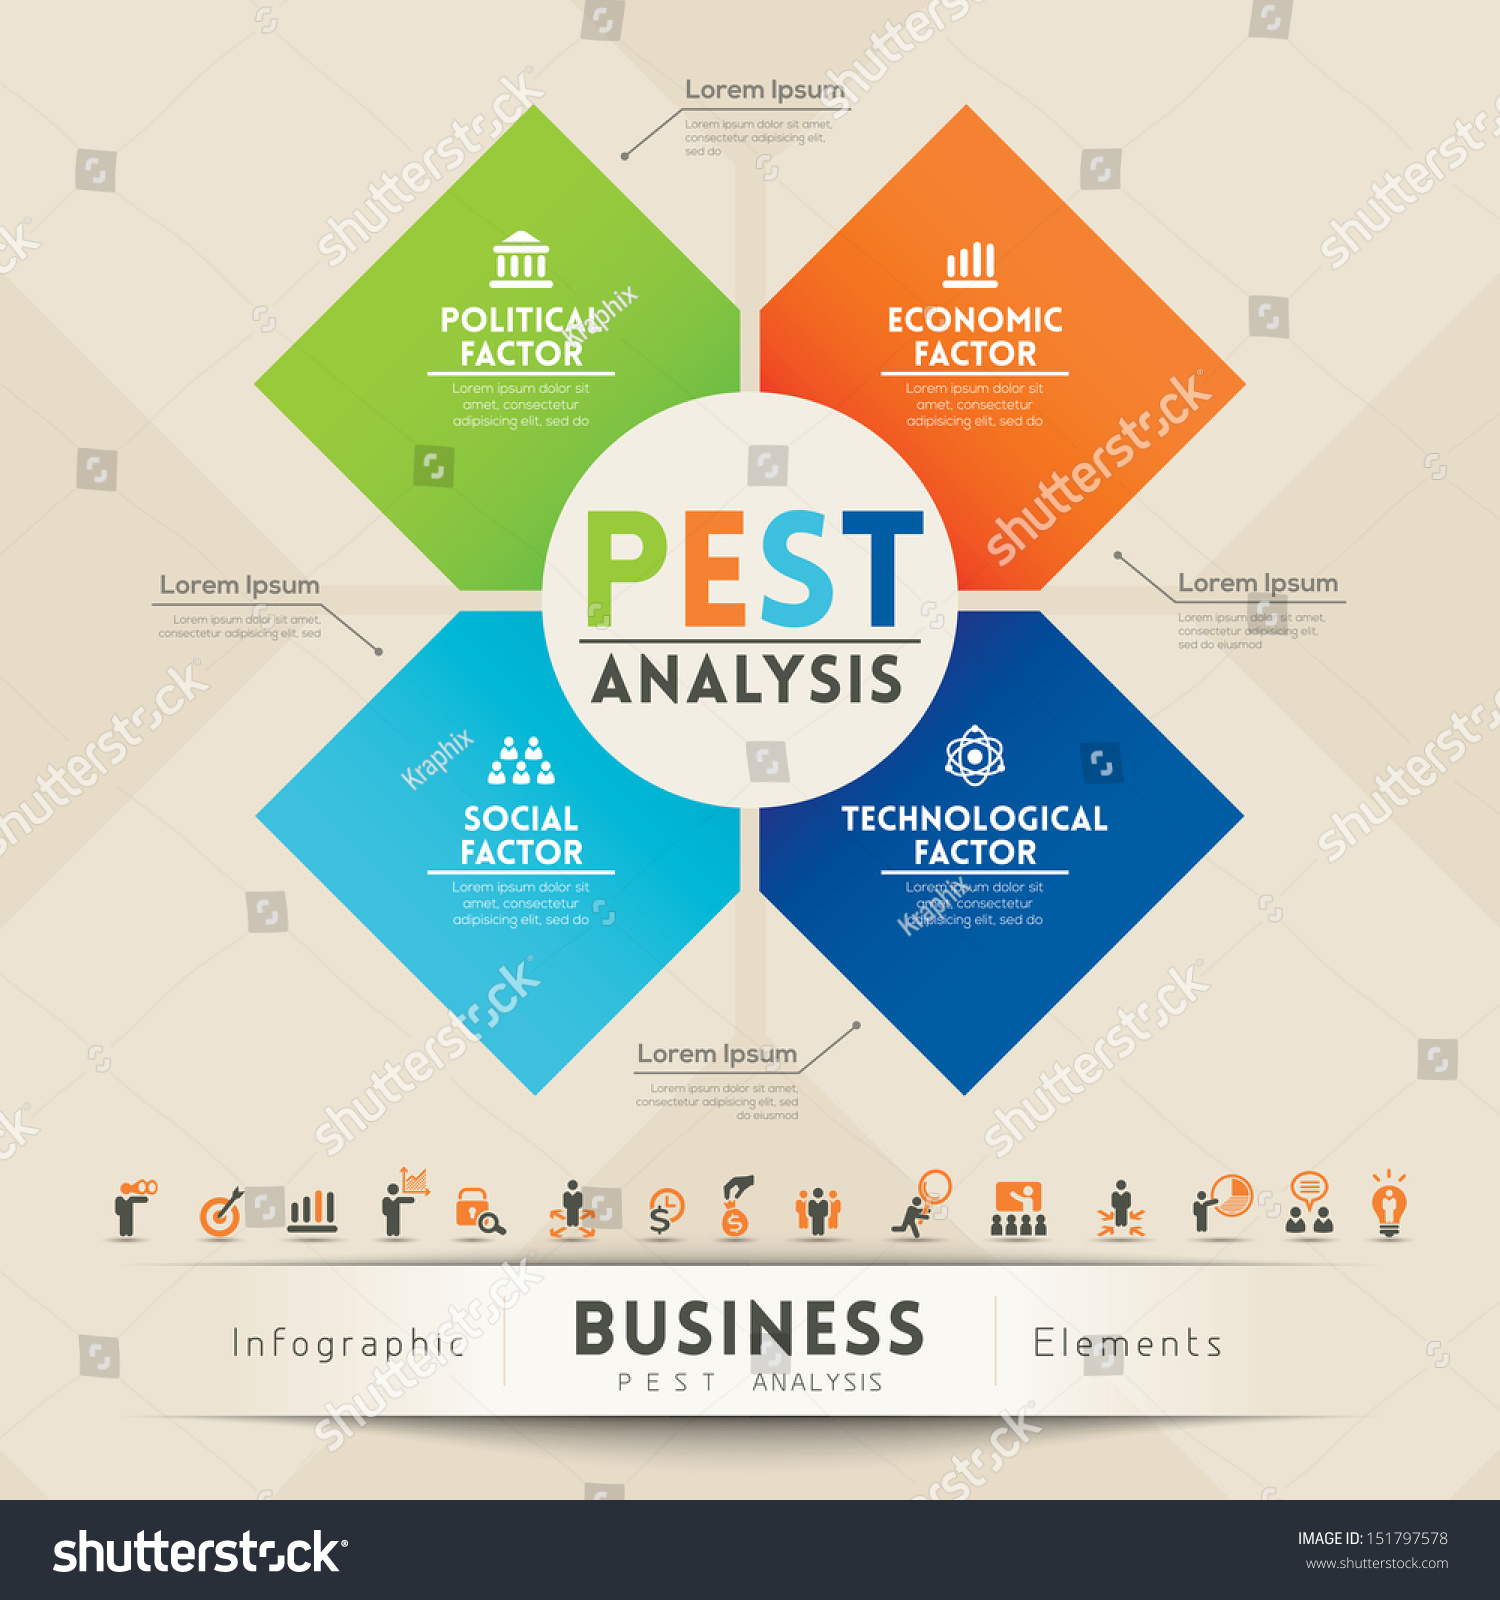 What Is a PEST Analysis?